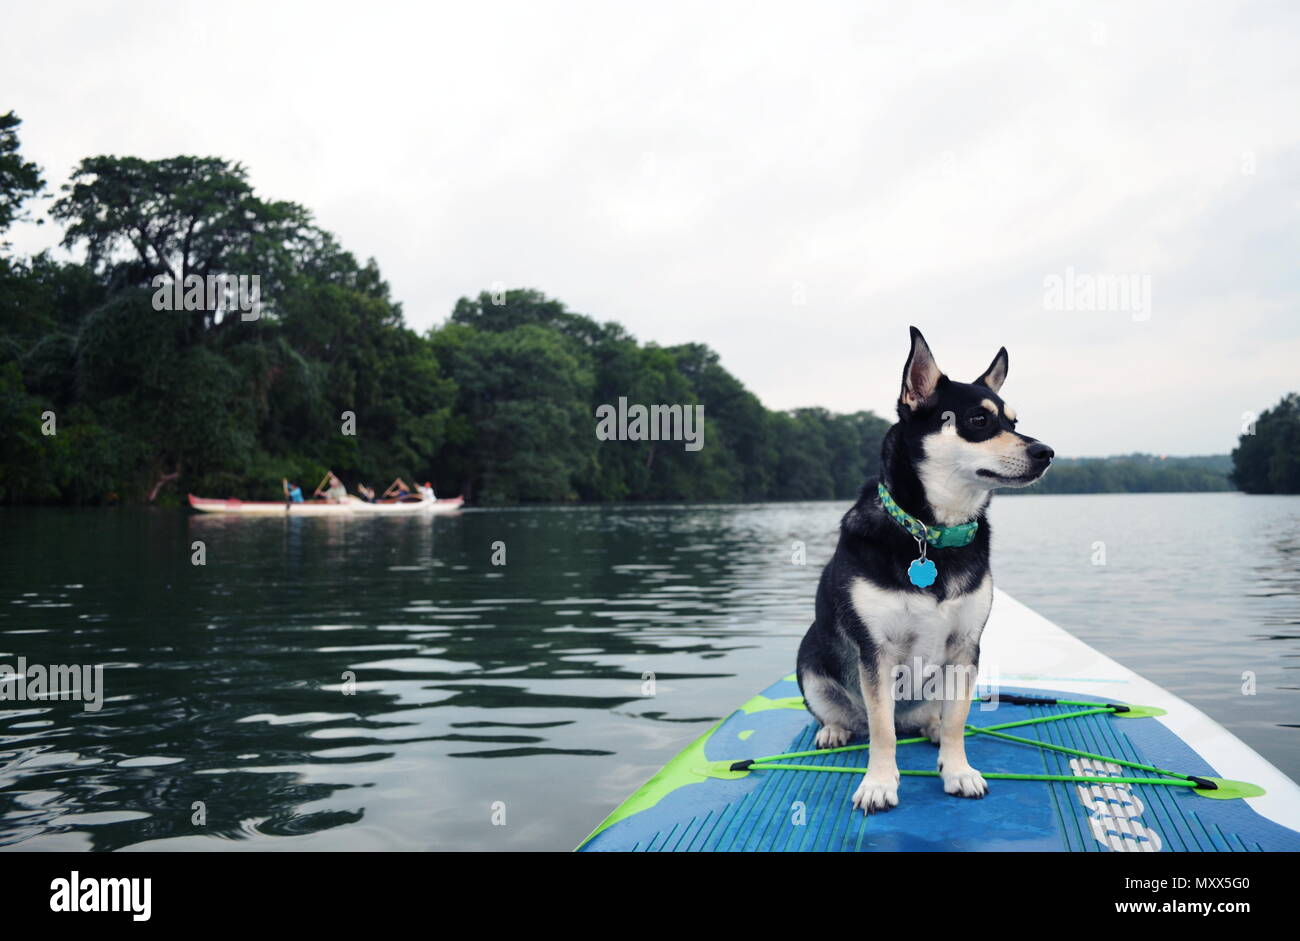 Watching an outrigger canoe while on a paddle board with a dog in Austin, Texas. Stock Photo